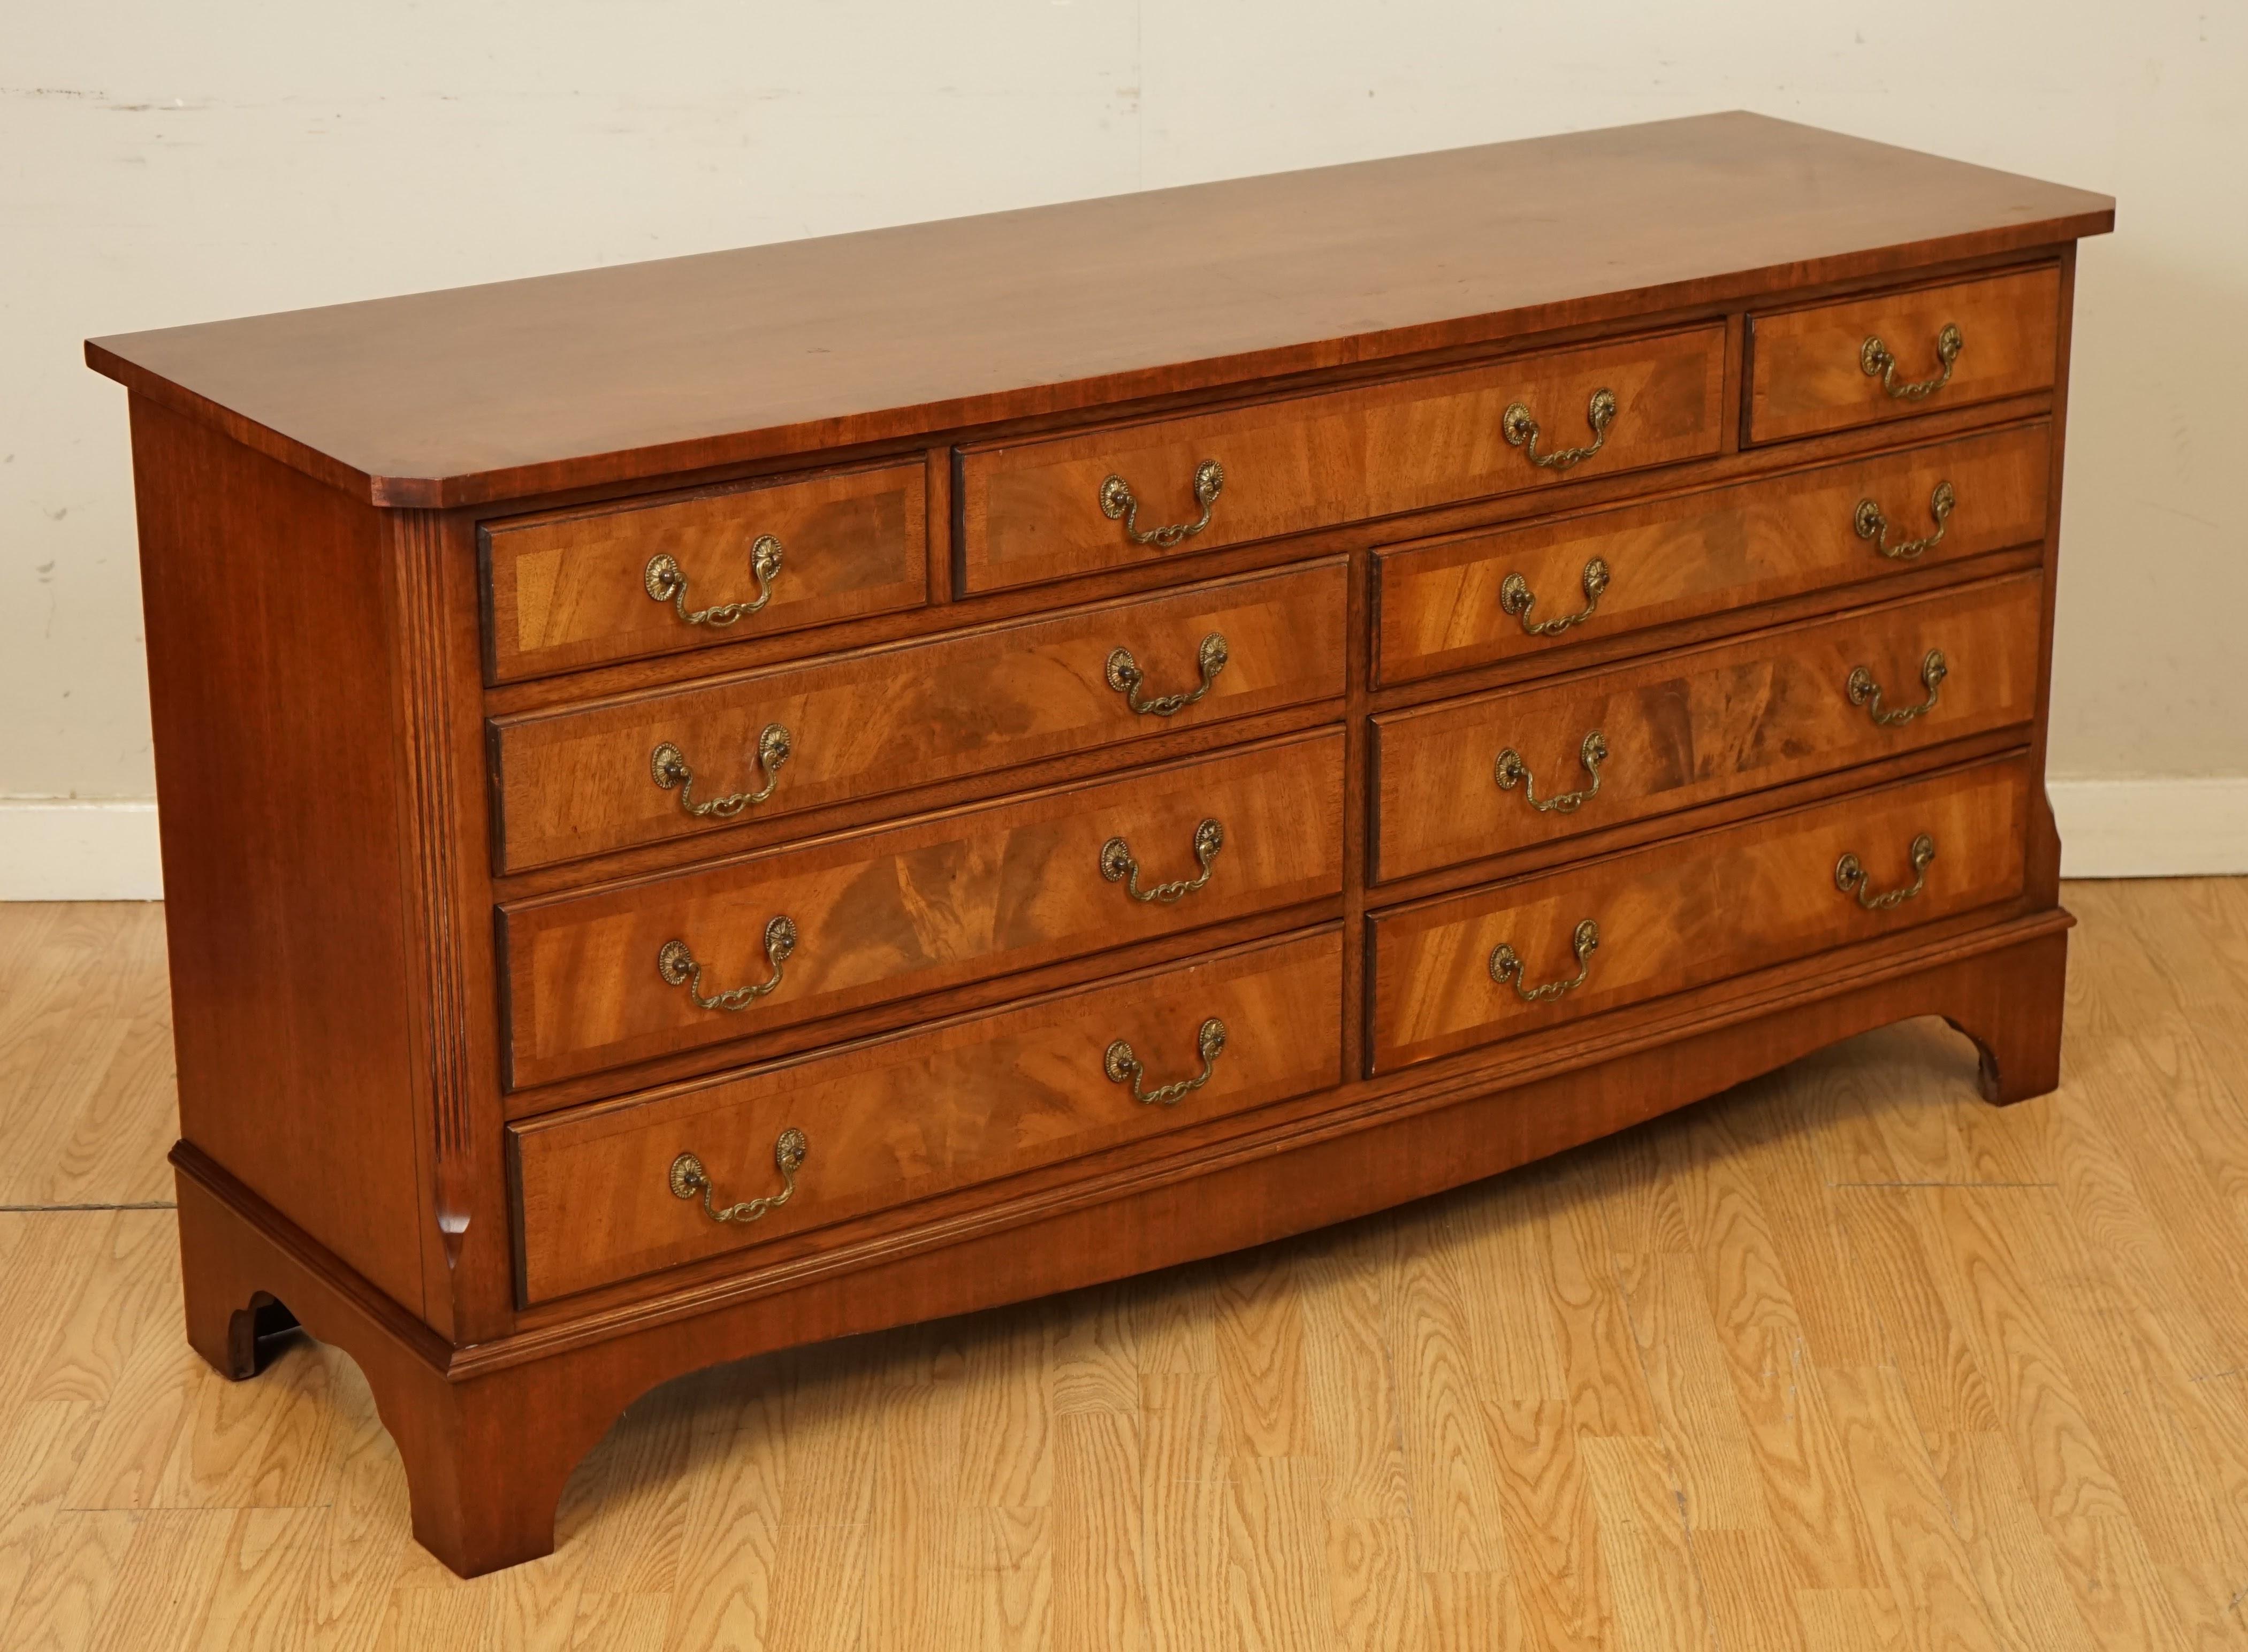 We are so excited to present to you a lovely mahogany sideboard by Bevan and Funnel.
It's a very well made and solid piece that holds graduated nine drawers.

We have lightly restored this item by hand cleaning, waxing and polishing.

Please